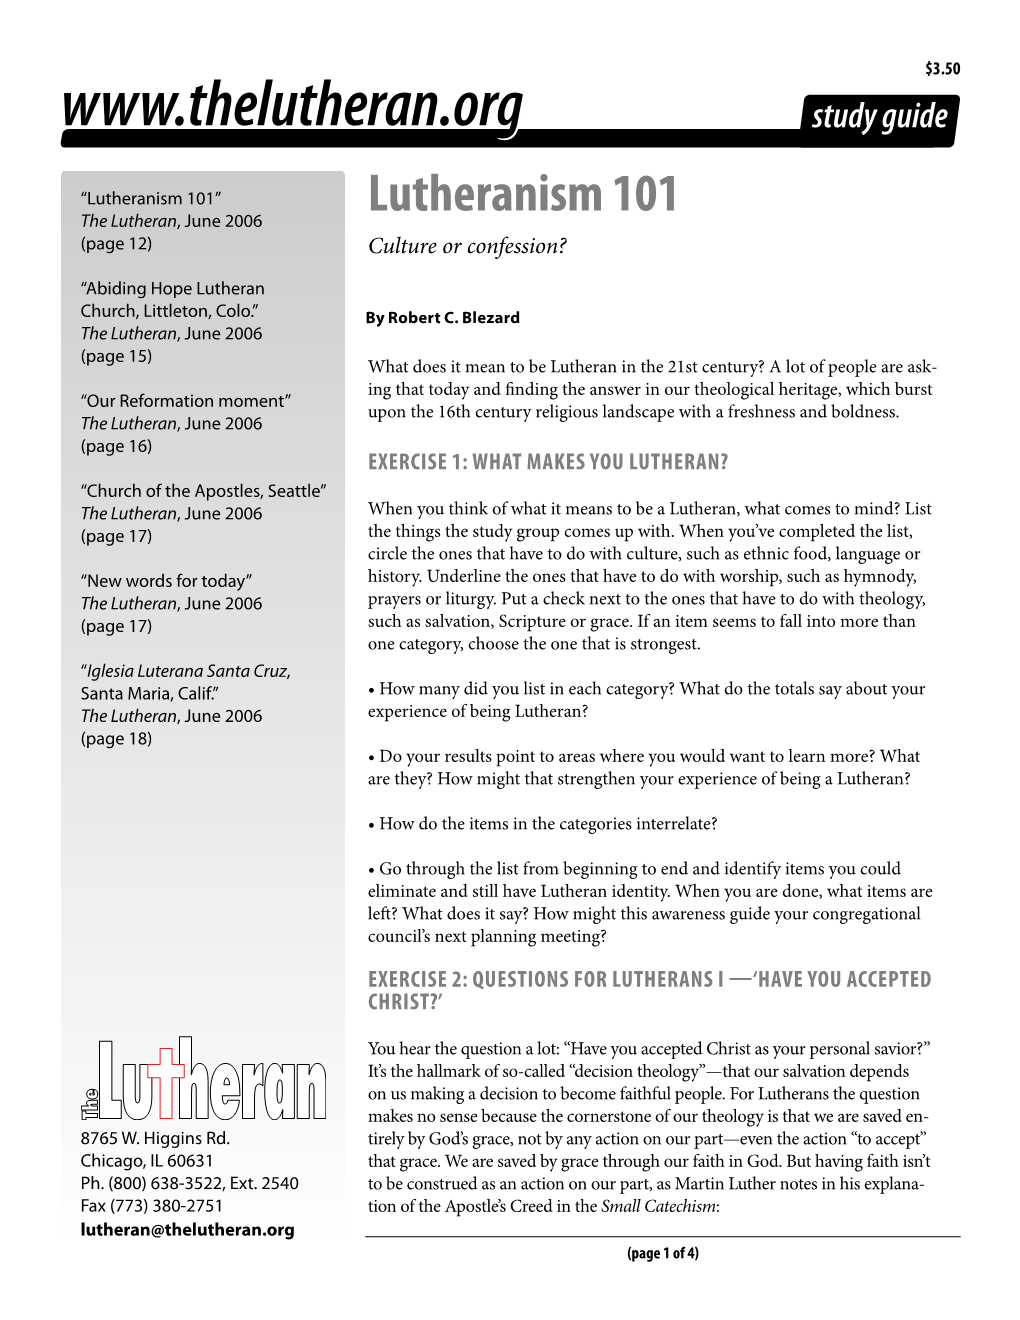 Lutherans I ‘Have You Accepted Christ?’